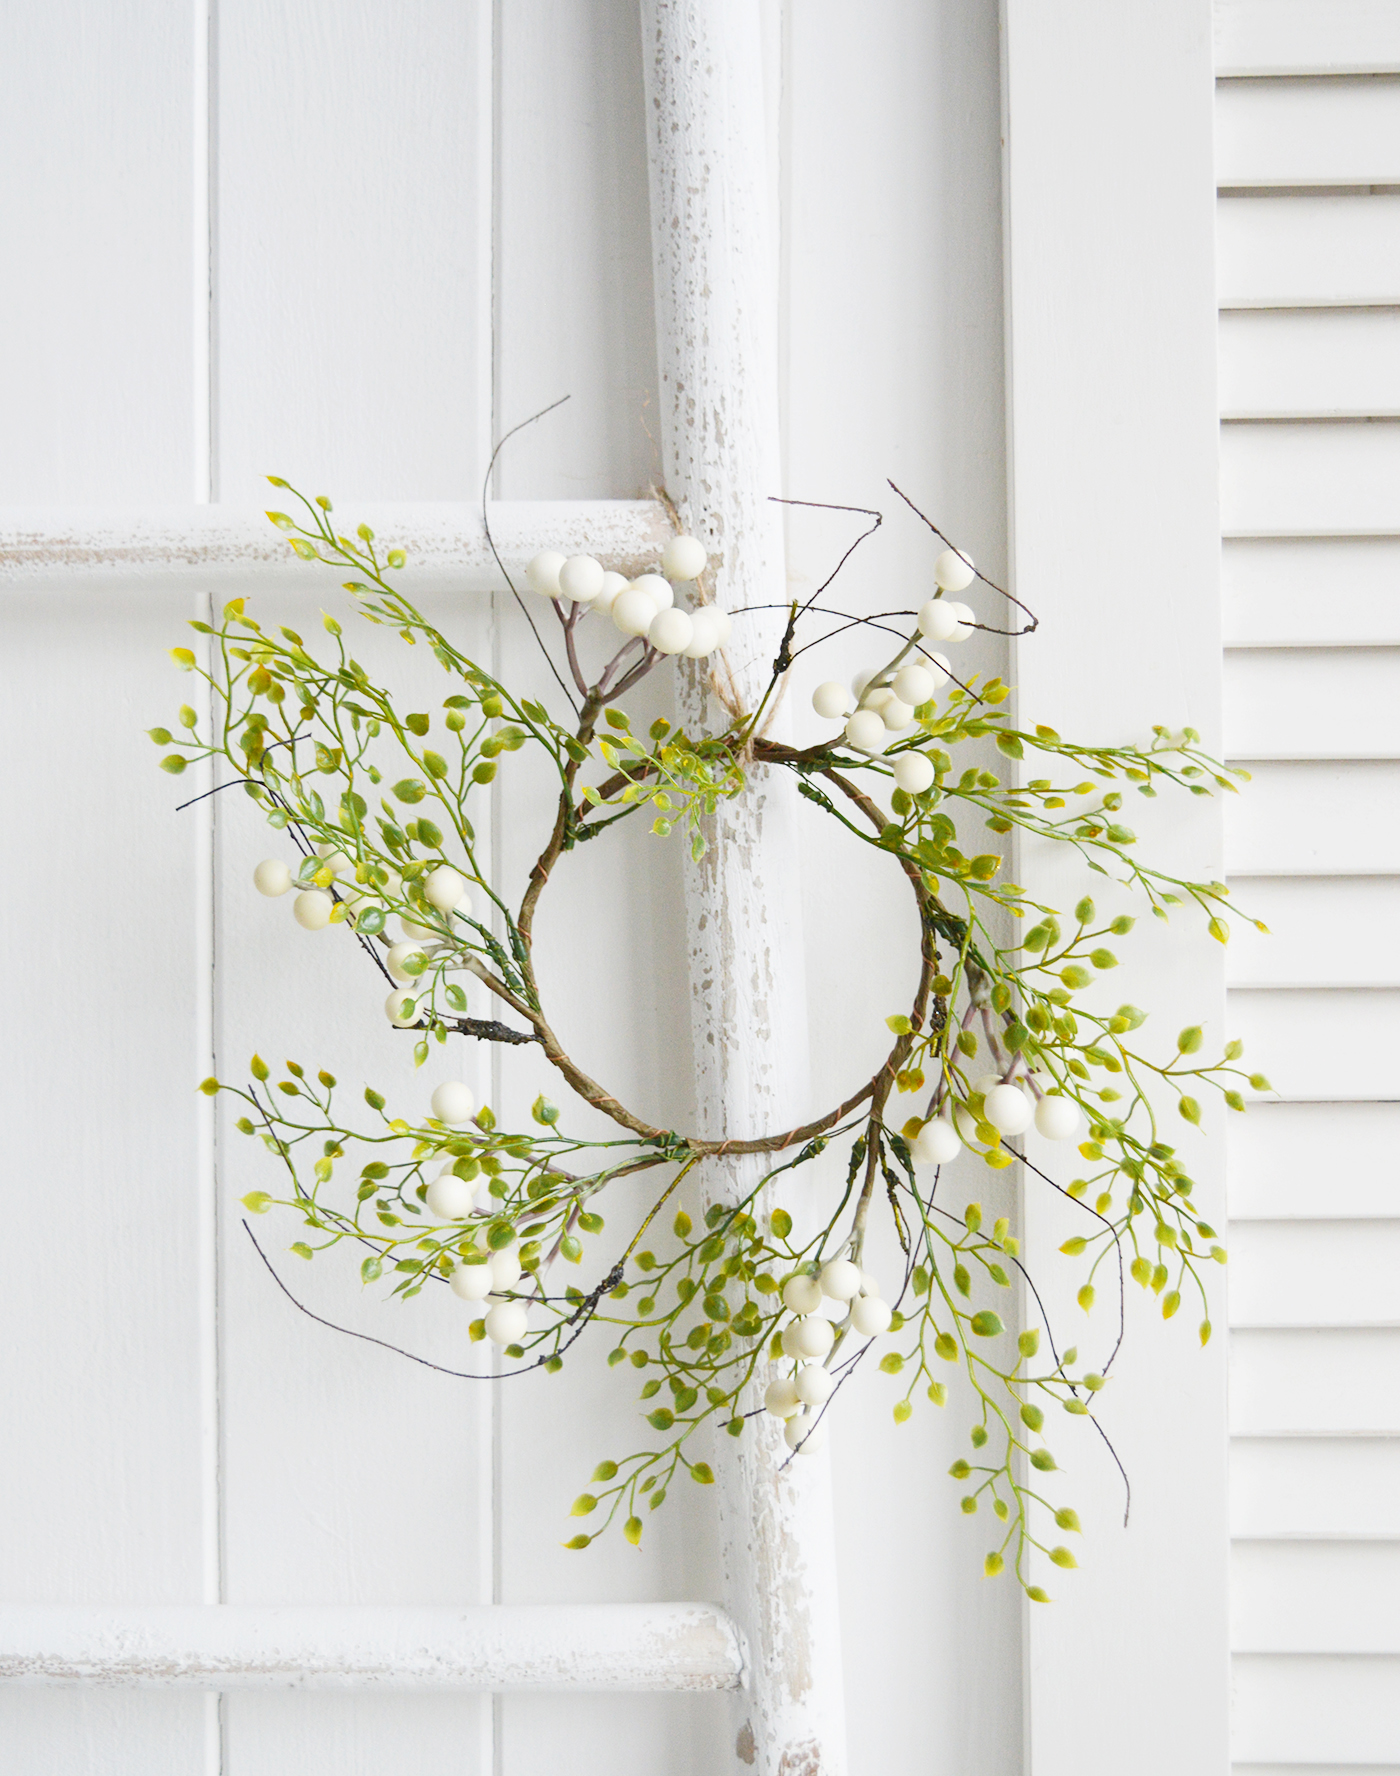 White Berries Wreath for a traditional New England look to your room from The White Lighthouse Furniture for the hallway, living room, bedroom and bathroom. New England coastal, country and farmhouse interiors